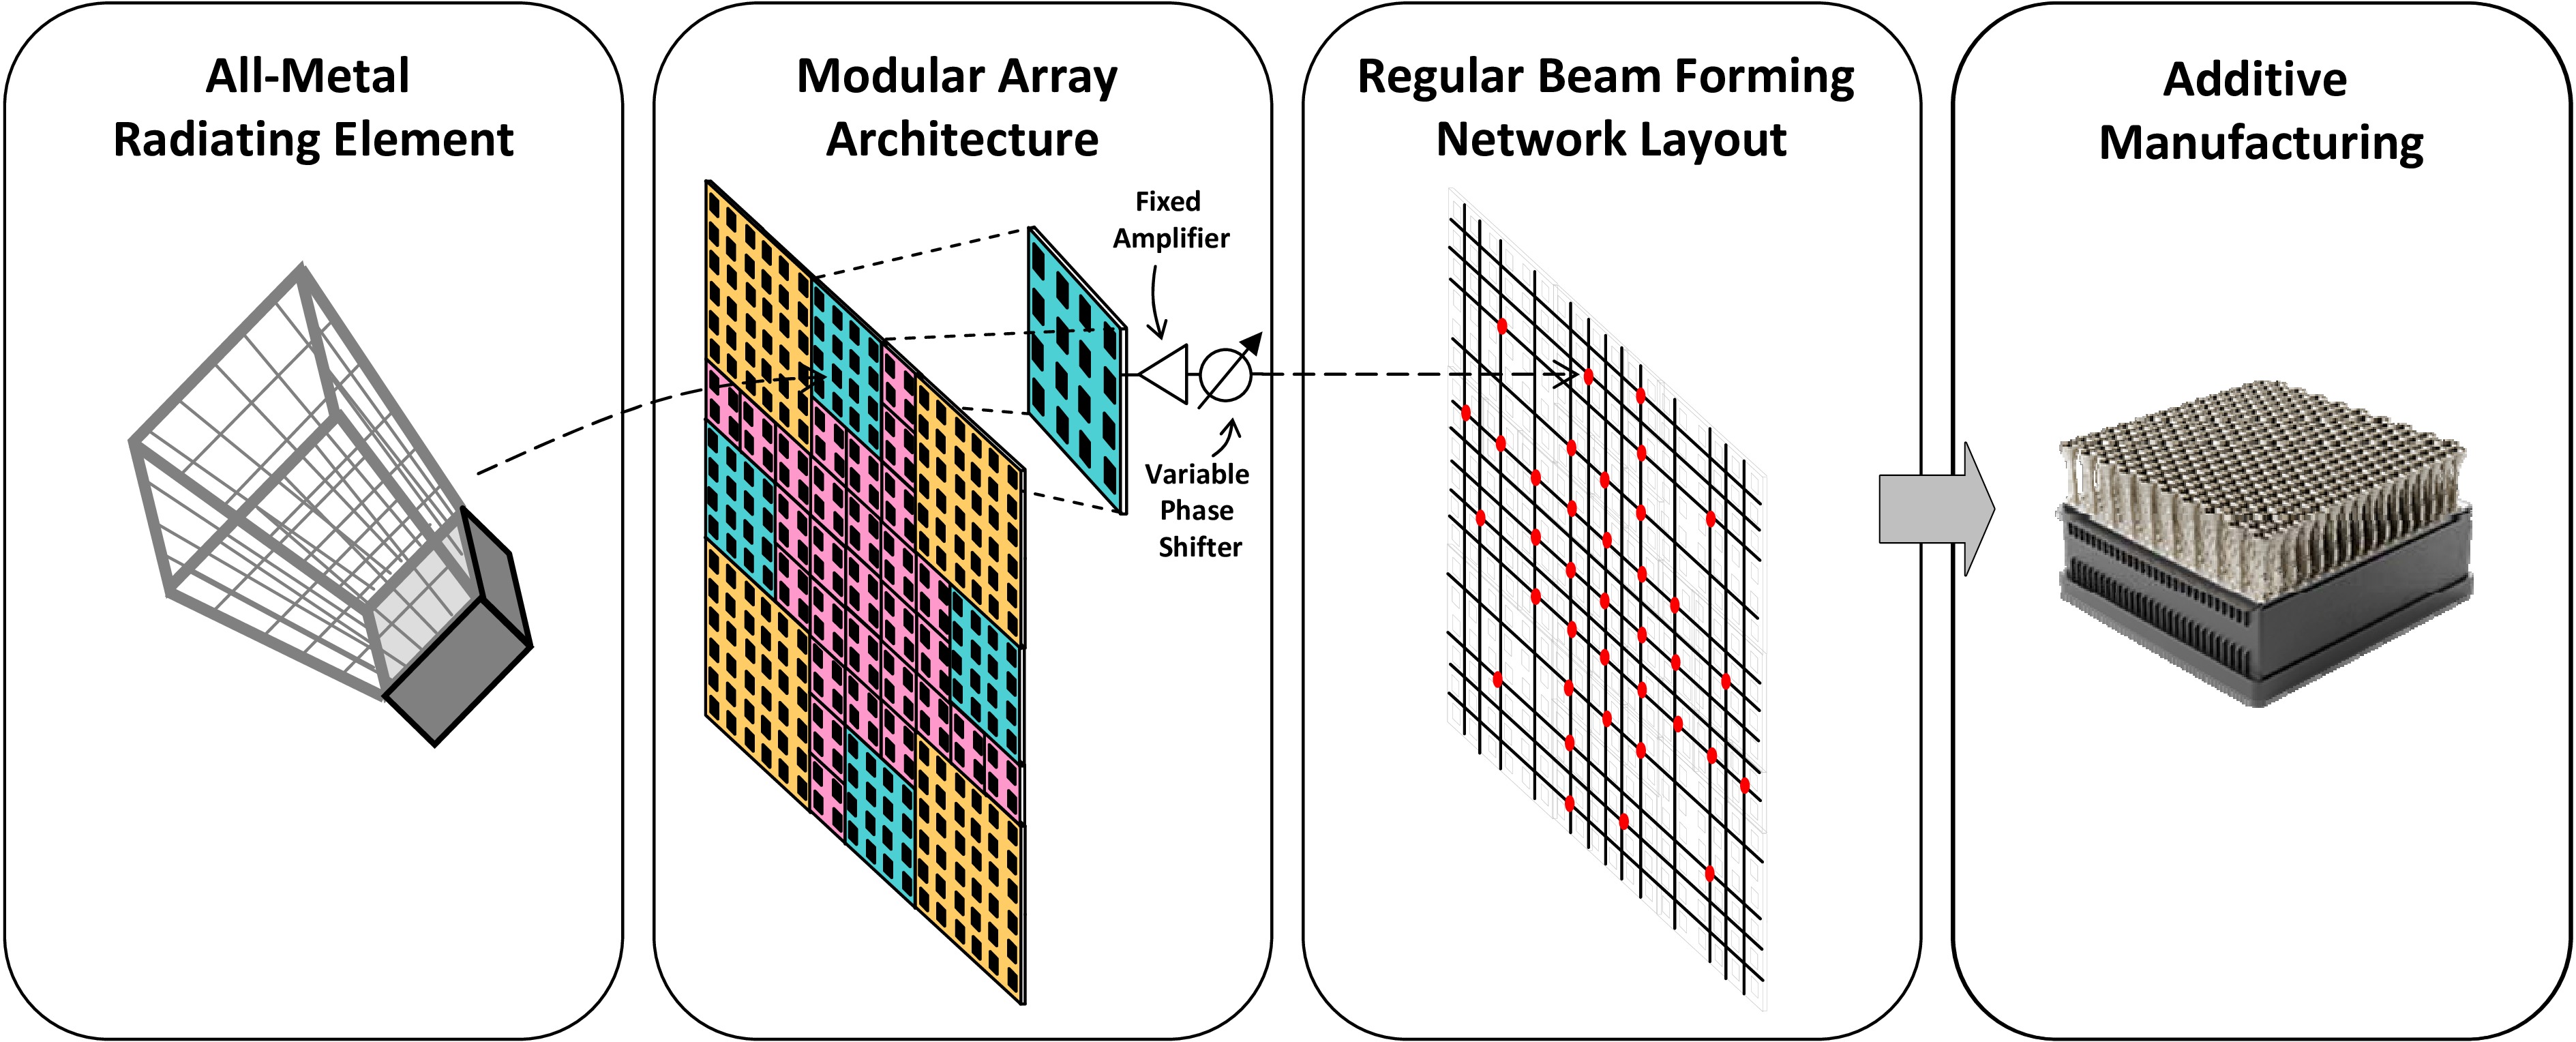 Modular Scanning Array based on Simple Antenna Manufacturing New Ideas for the Commercial Use of ESA's Inventions